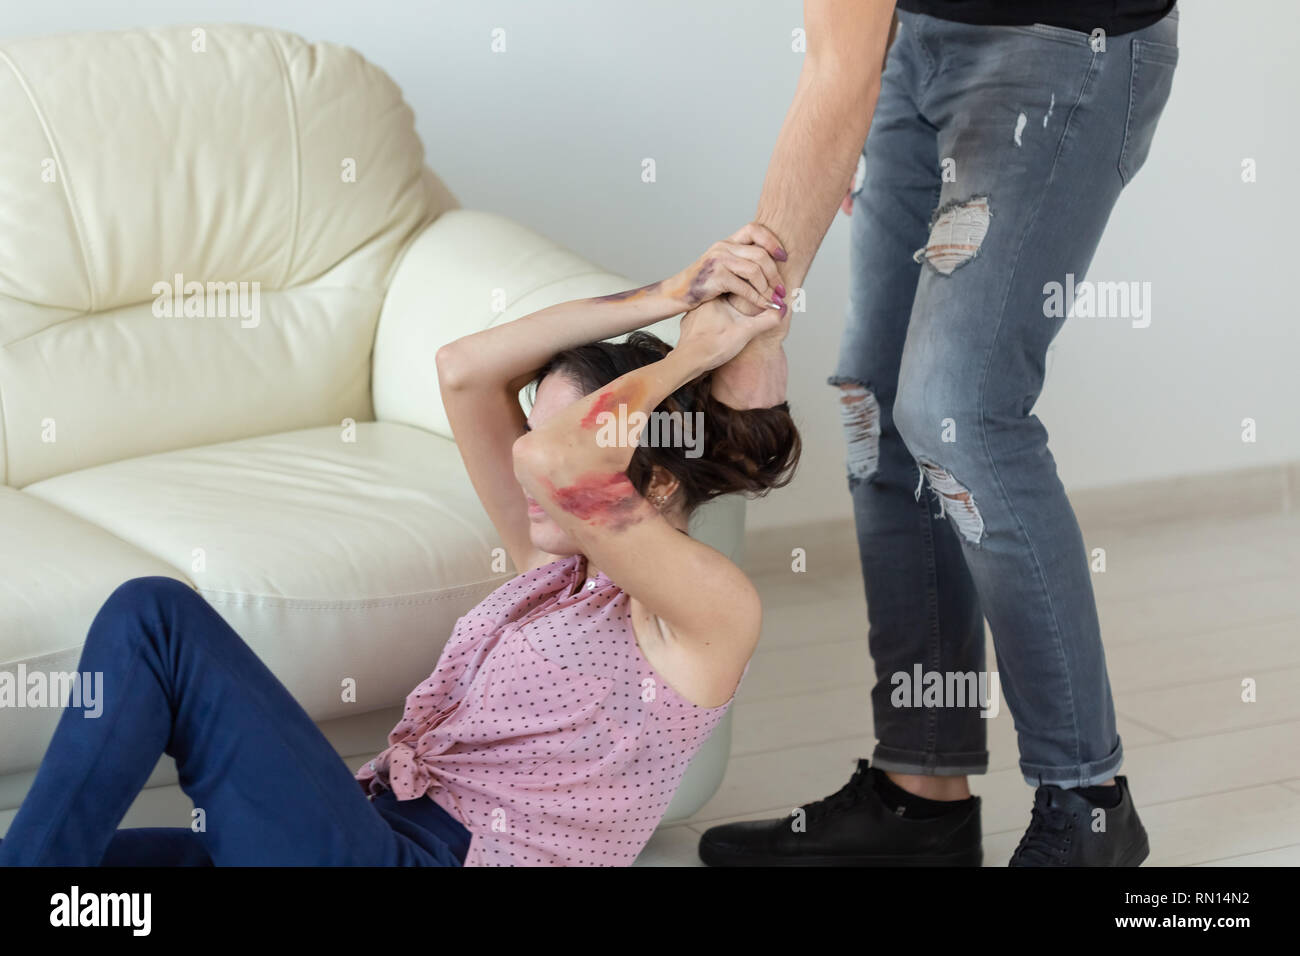 domestic violence, victim and abuse concept - cruel aggressive man grabbing woman lying on the floor Stock Photo